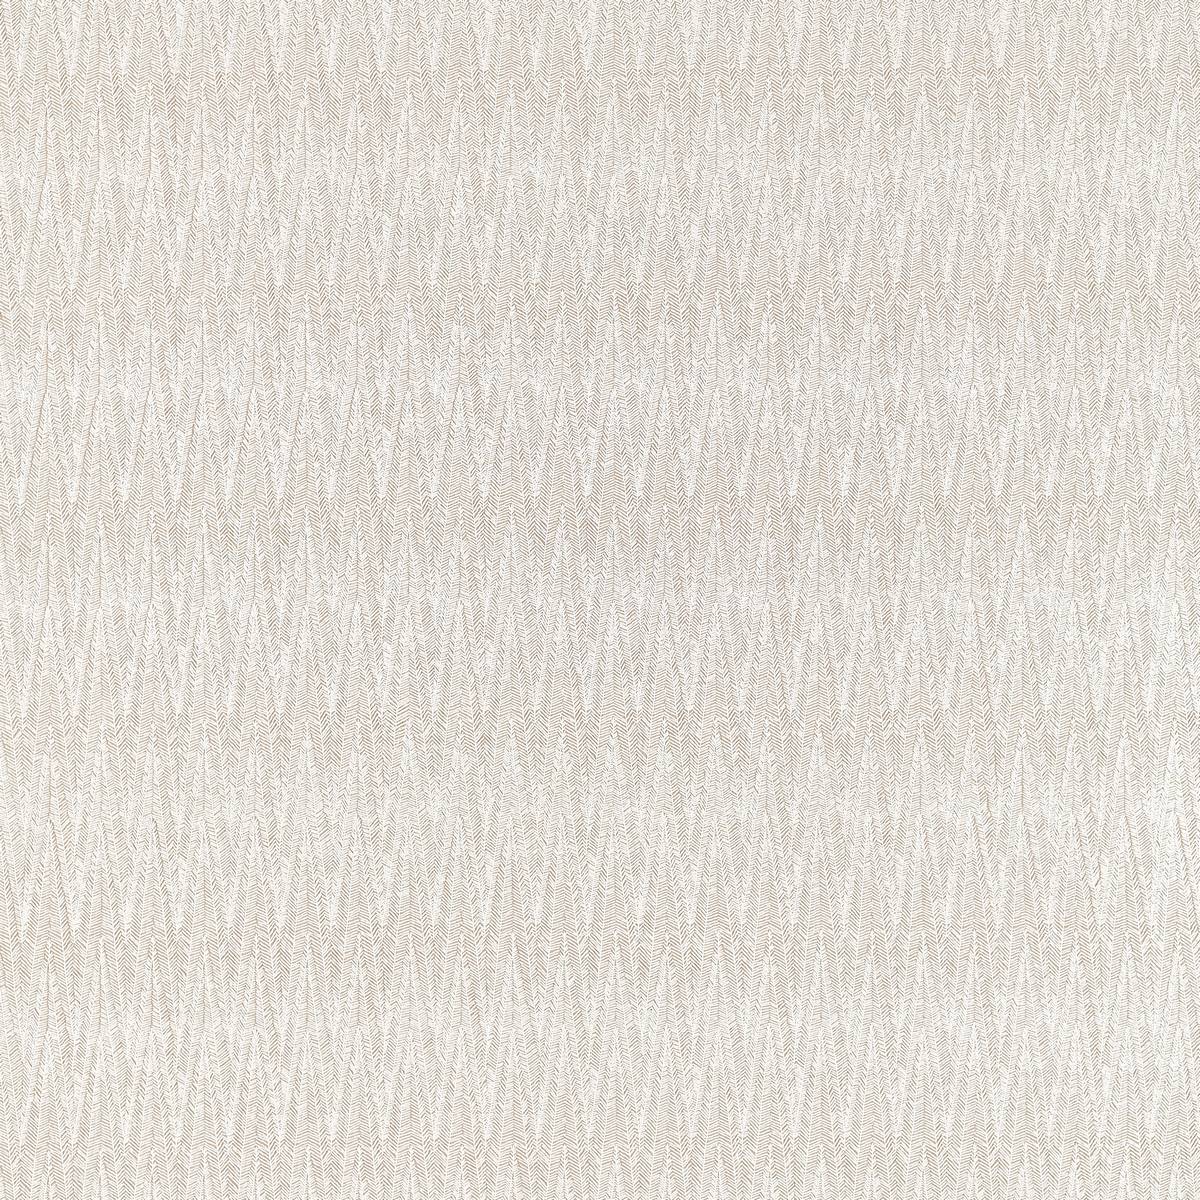 Beckett Chalk/Taupe Fabric by Sanderson